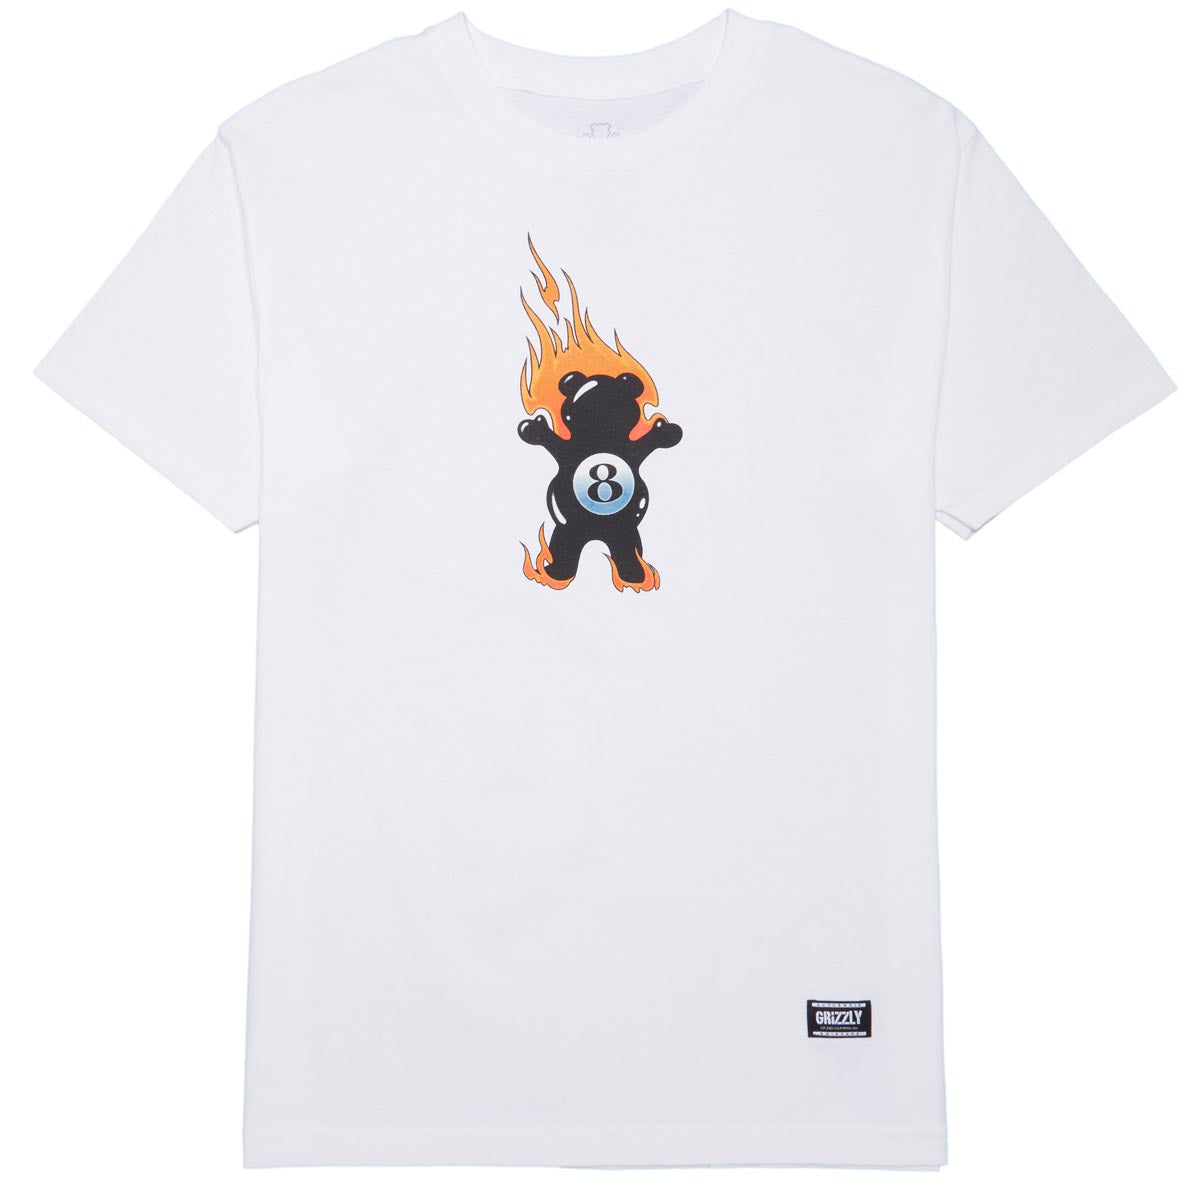 Grizzly Behind The 8Ball T-Shirt - White image 1